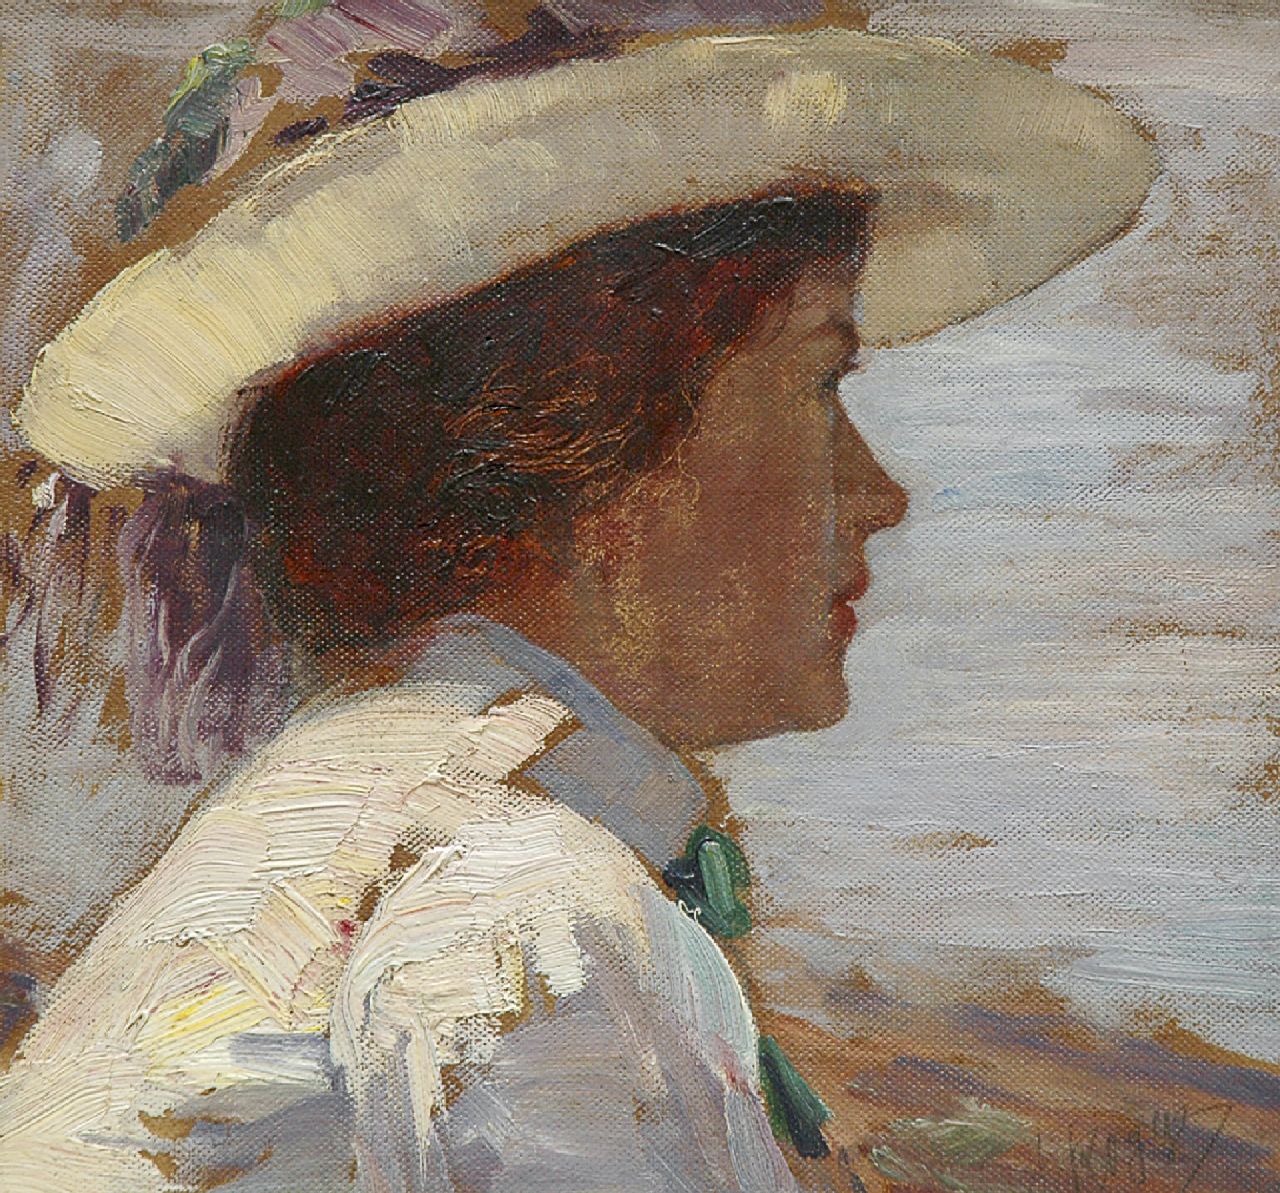 Rogge A.  | Adalbert Rogge, Lady with hat looking out over the sea, oil on board 23.9 x 25.0 cm, signed l.r.